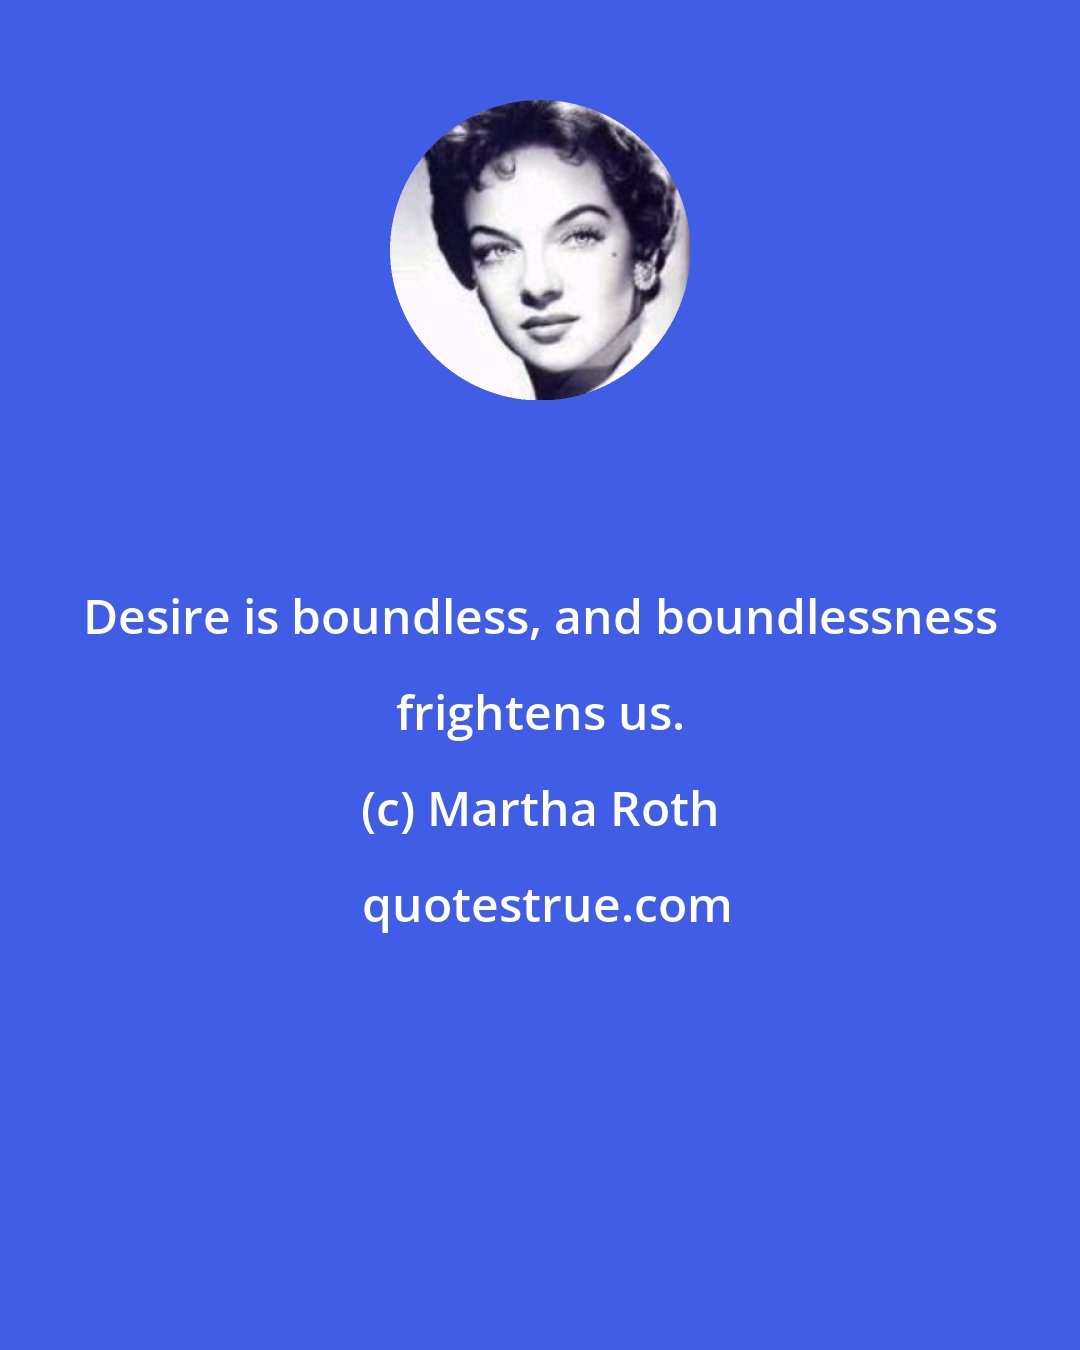 Martha Roth: Desire is boundless, and boundlessness frightens us.